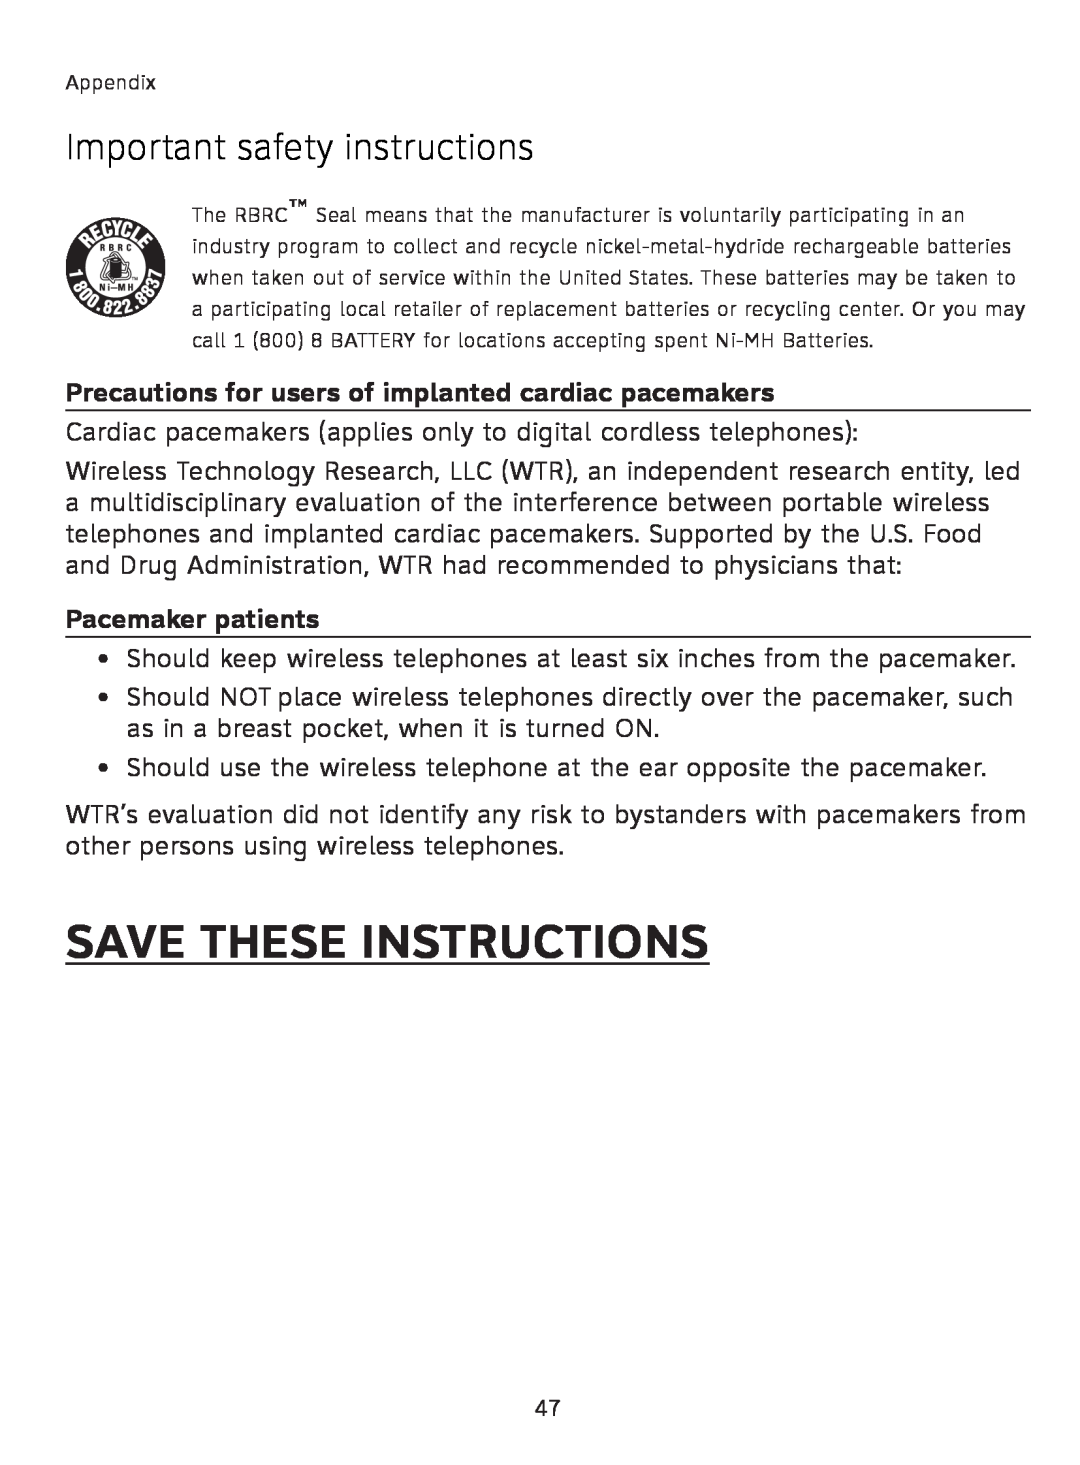 AT&T AT3111-2 user manual Save These Instructions, Important safety instructions, Pacemaker patients 